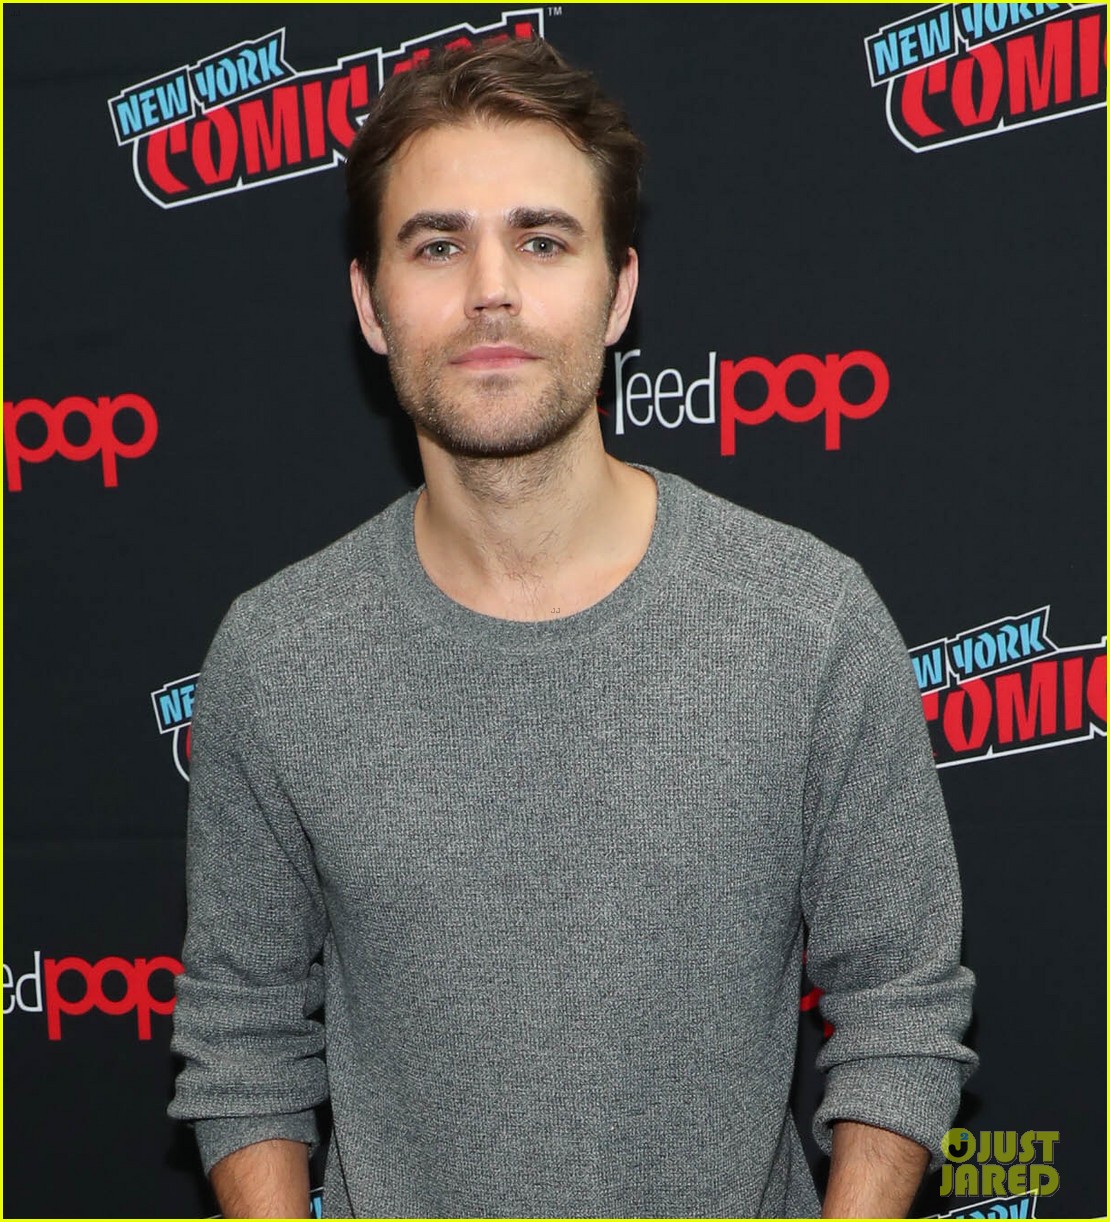 paul wesley danielle campbell comic con new york 04